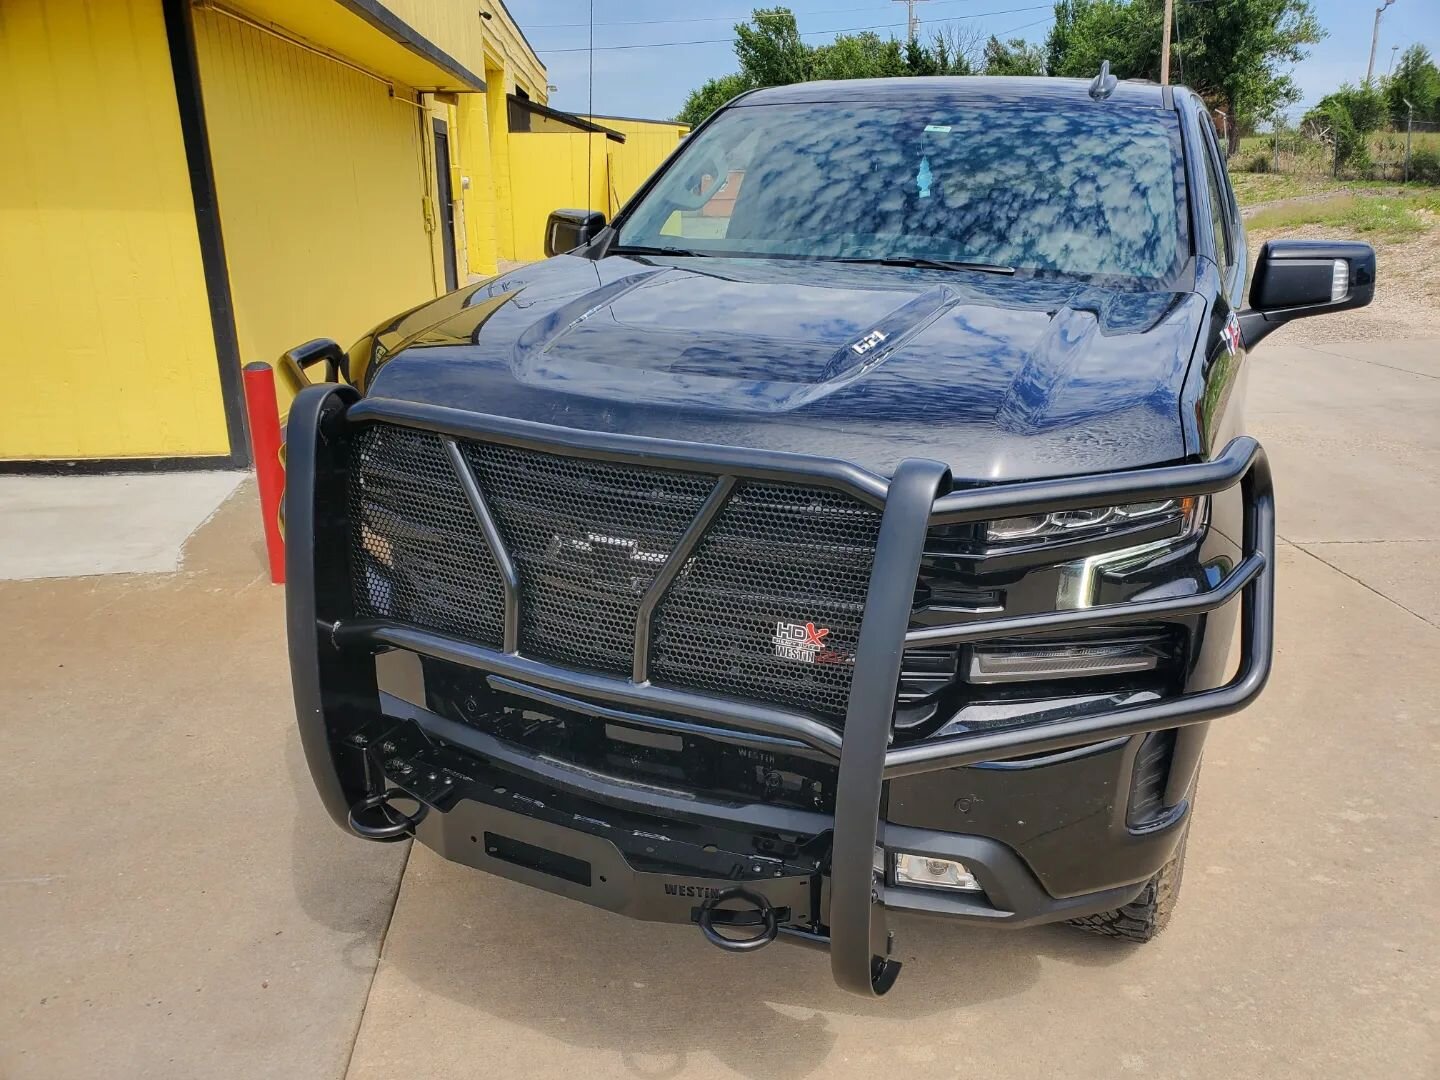 Front End Friday! 💪🏽😎

2022 Chevy 1500 Trailboss
✅️ @westinautomotive HDX Winch Mount Grille Guard and Tow Hooks
✅ ️@gorhino RB20 Running Boards

We have the GEAR for where you're going!

Topeka LINE-X &amp; Accessories Center 
🌎 3108 SW Topeka B